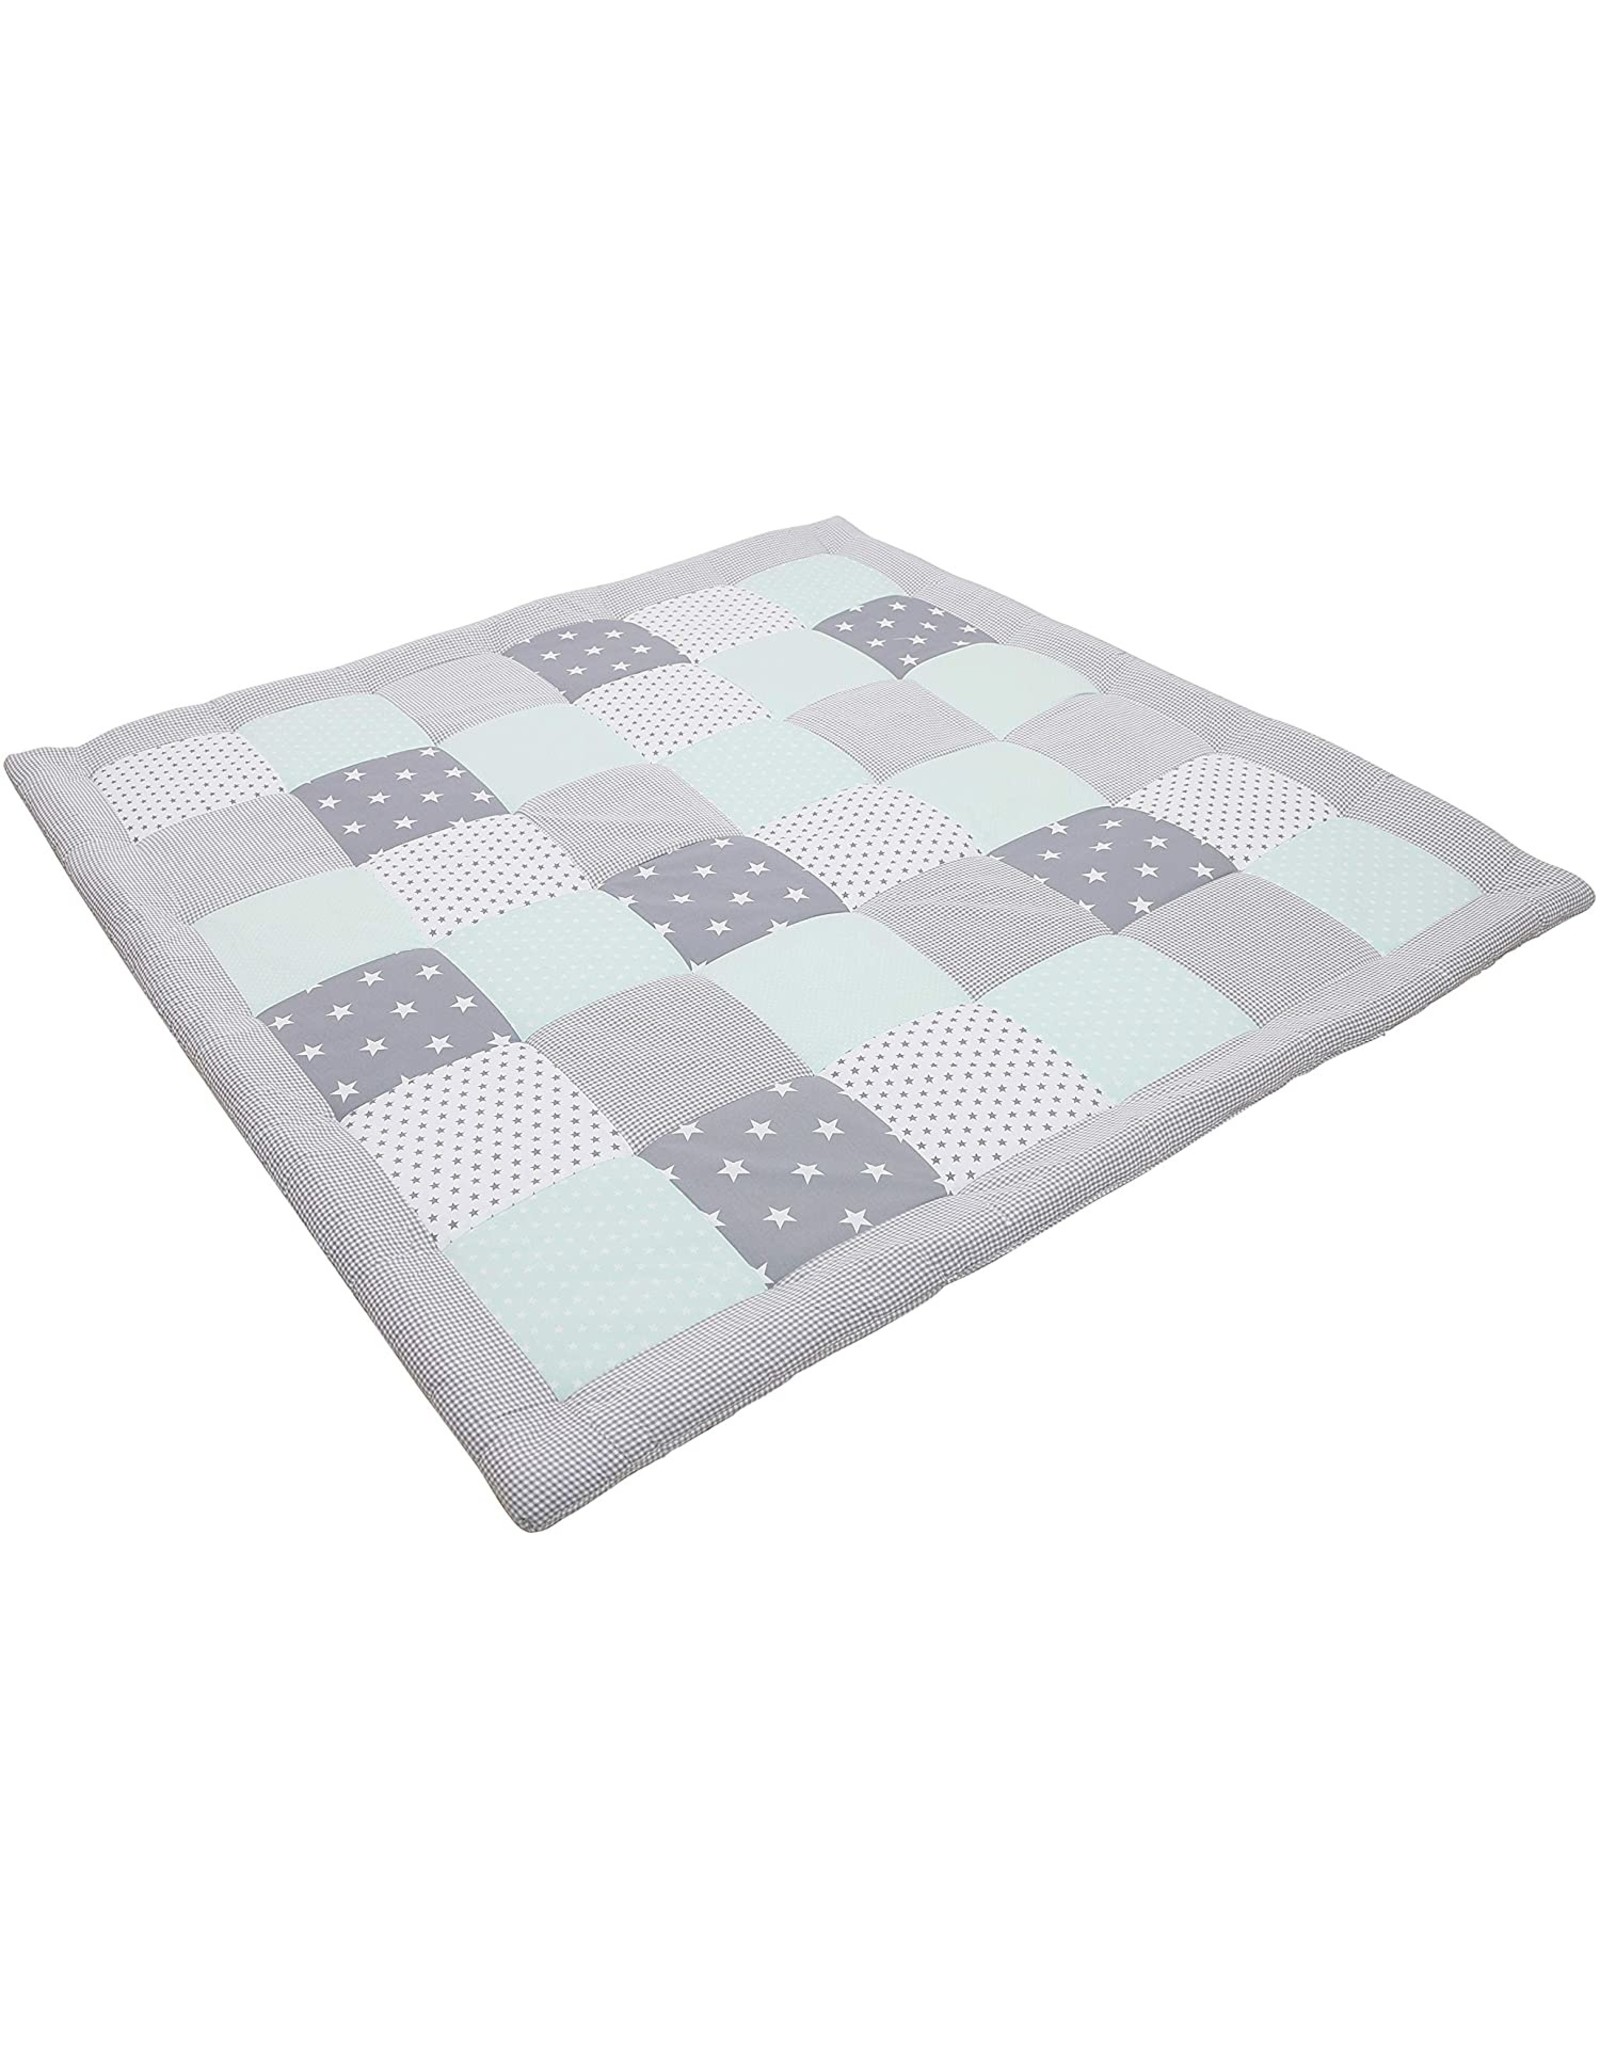 Ullenboom ULLENBOOM ® Baby crawling blanket, 140 x 140 cm, mint gray (Made in EU), crawling blanket for babies with 100% ÖkoTex cotton, ideal as baby blanket and play blanket